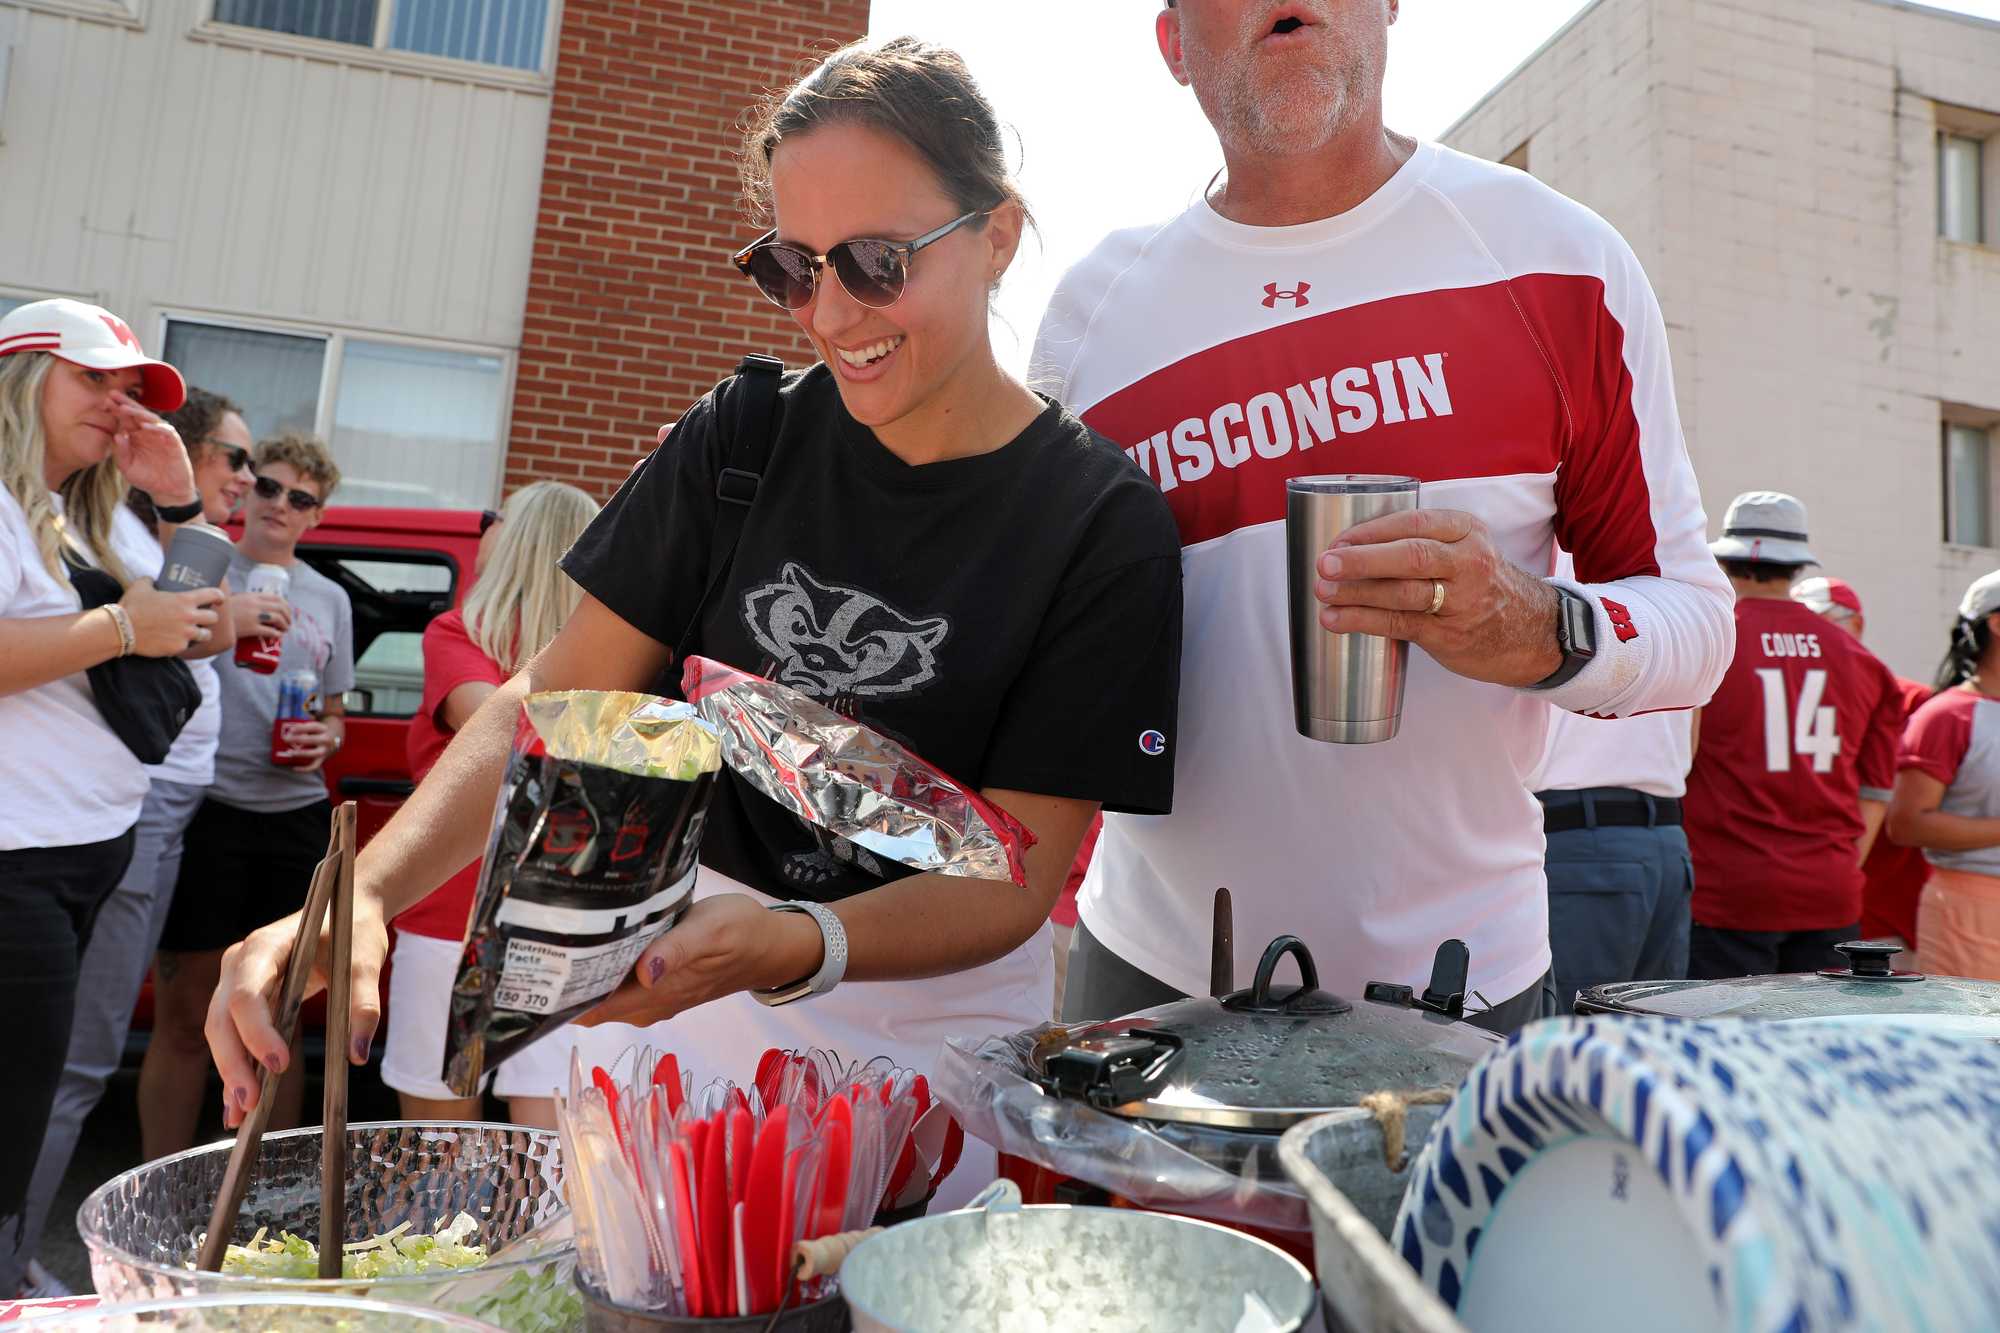 Lauren Schleicher, a new local fan from Middleton, Wis., made herself a “walking taco” at one of the tailgate parties.